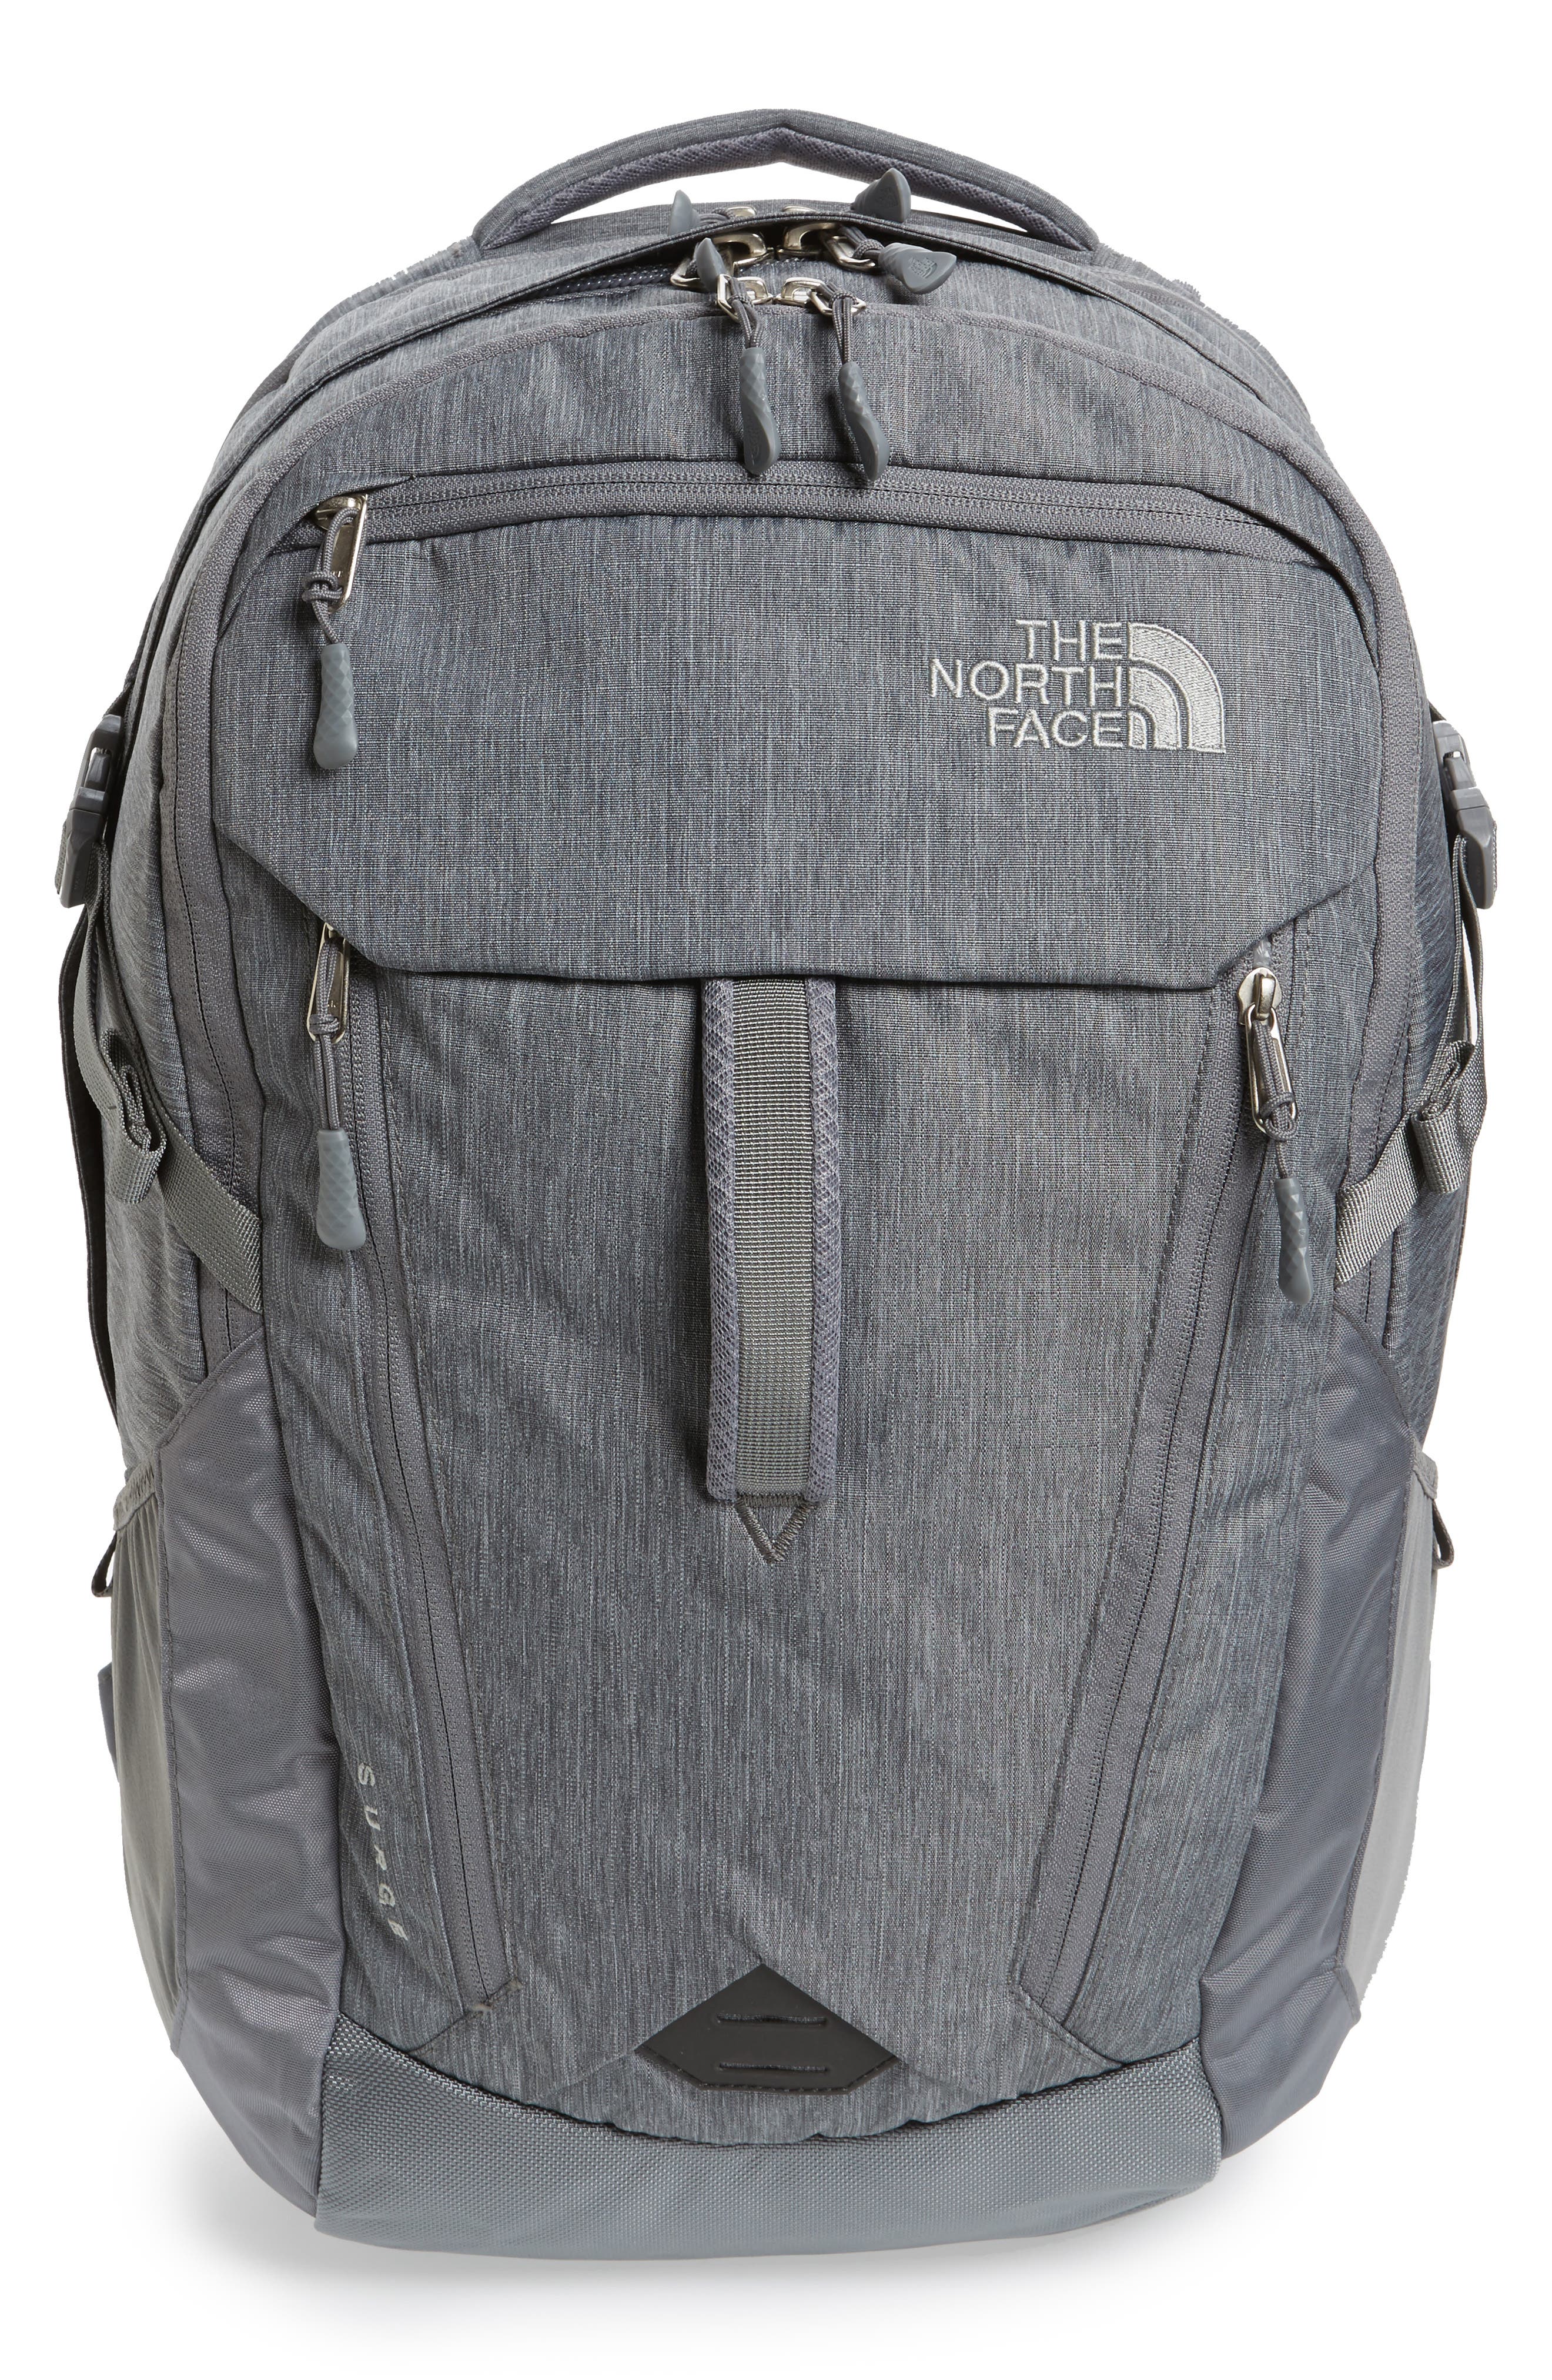 The North Face Surge 33L Backpack 